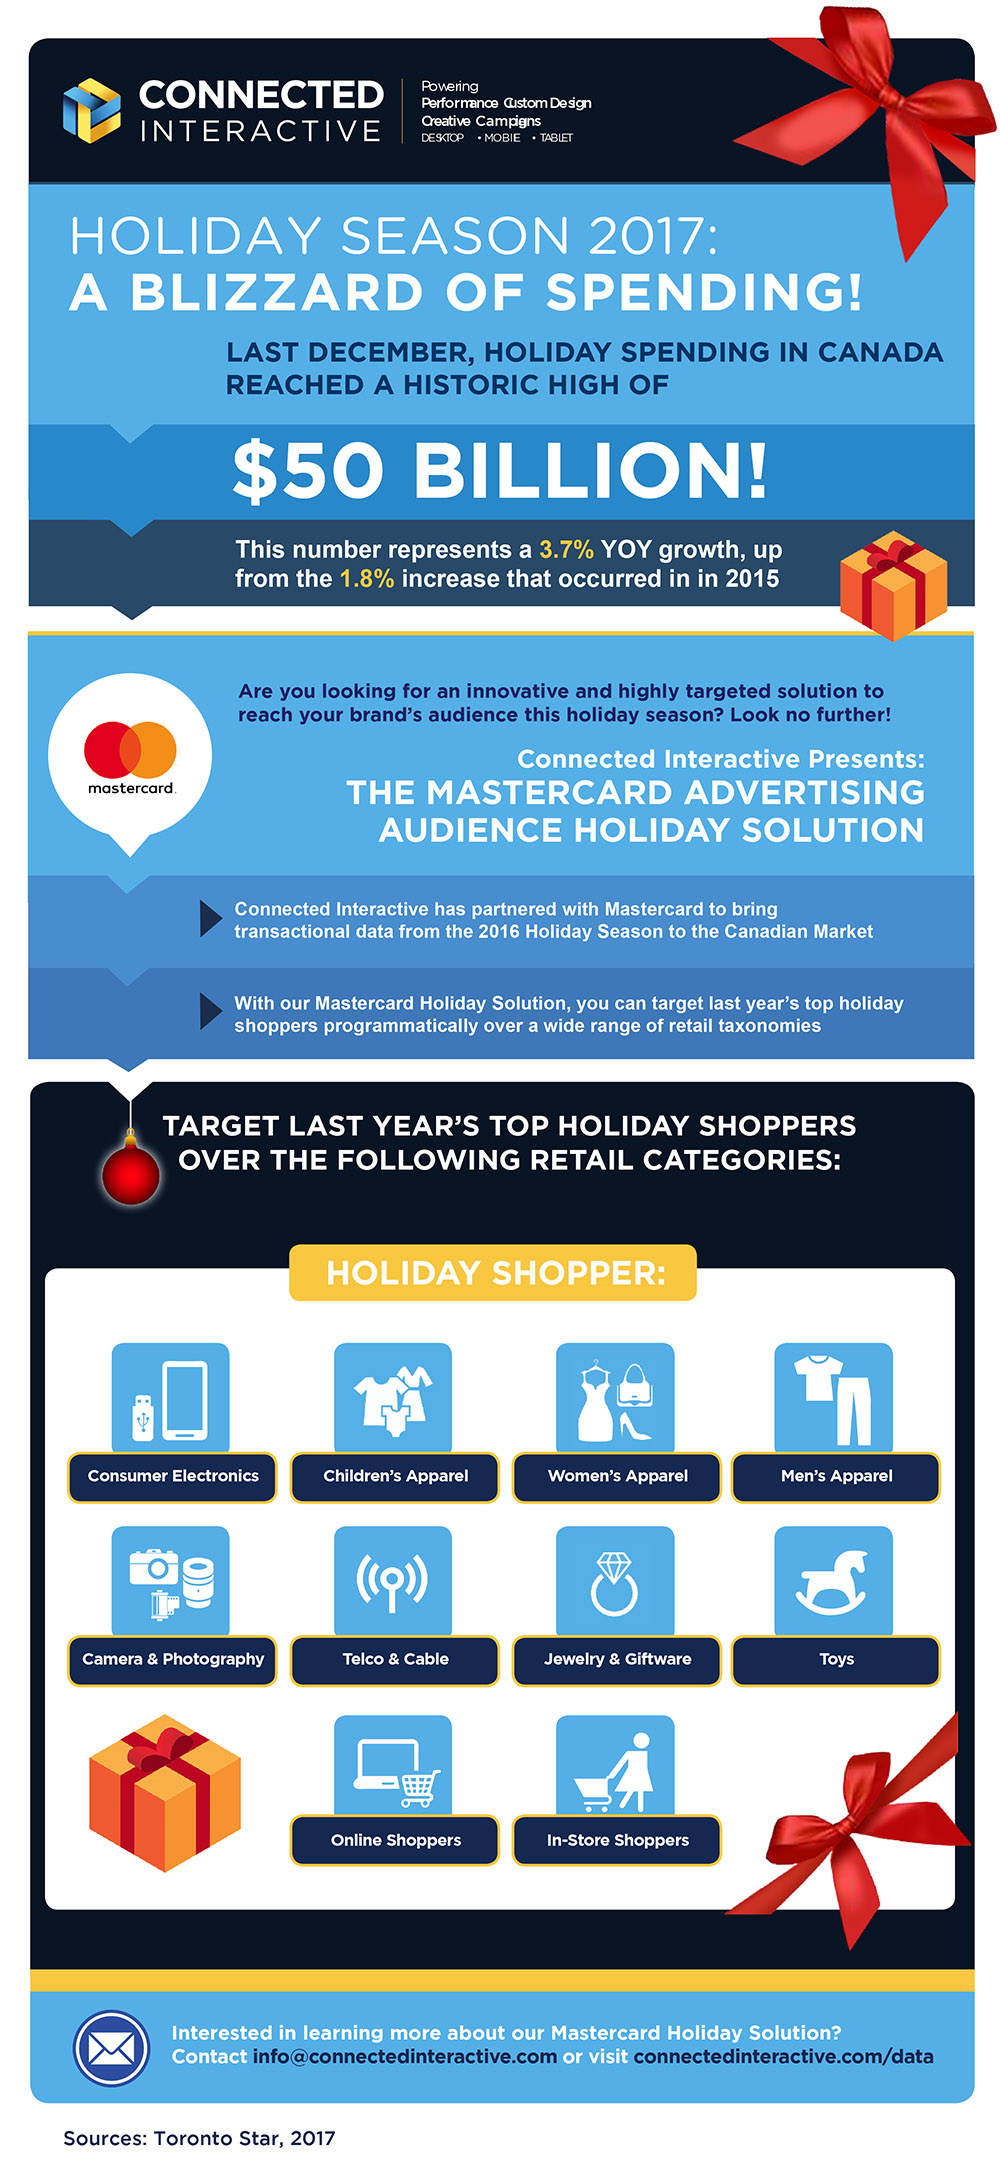 Holiday Season 2017: The Connected Interactive Retail Solution